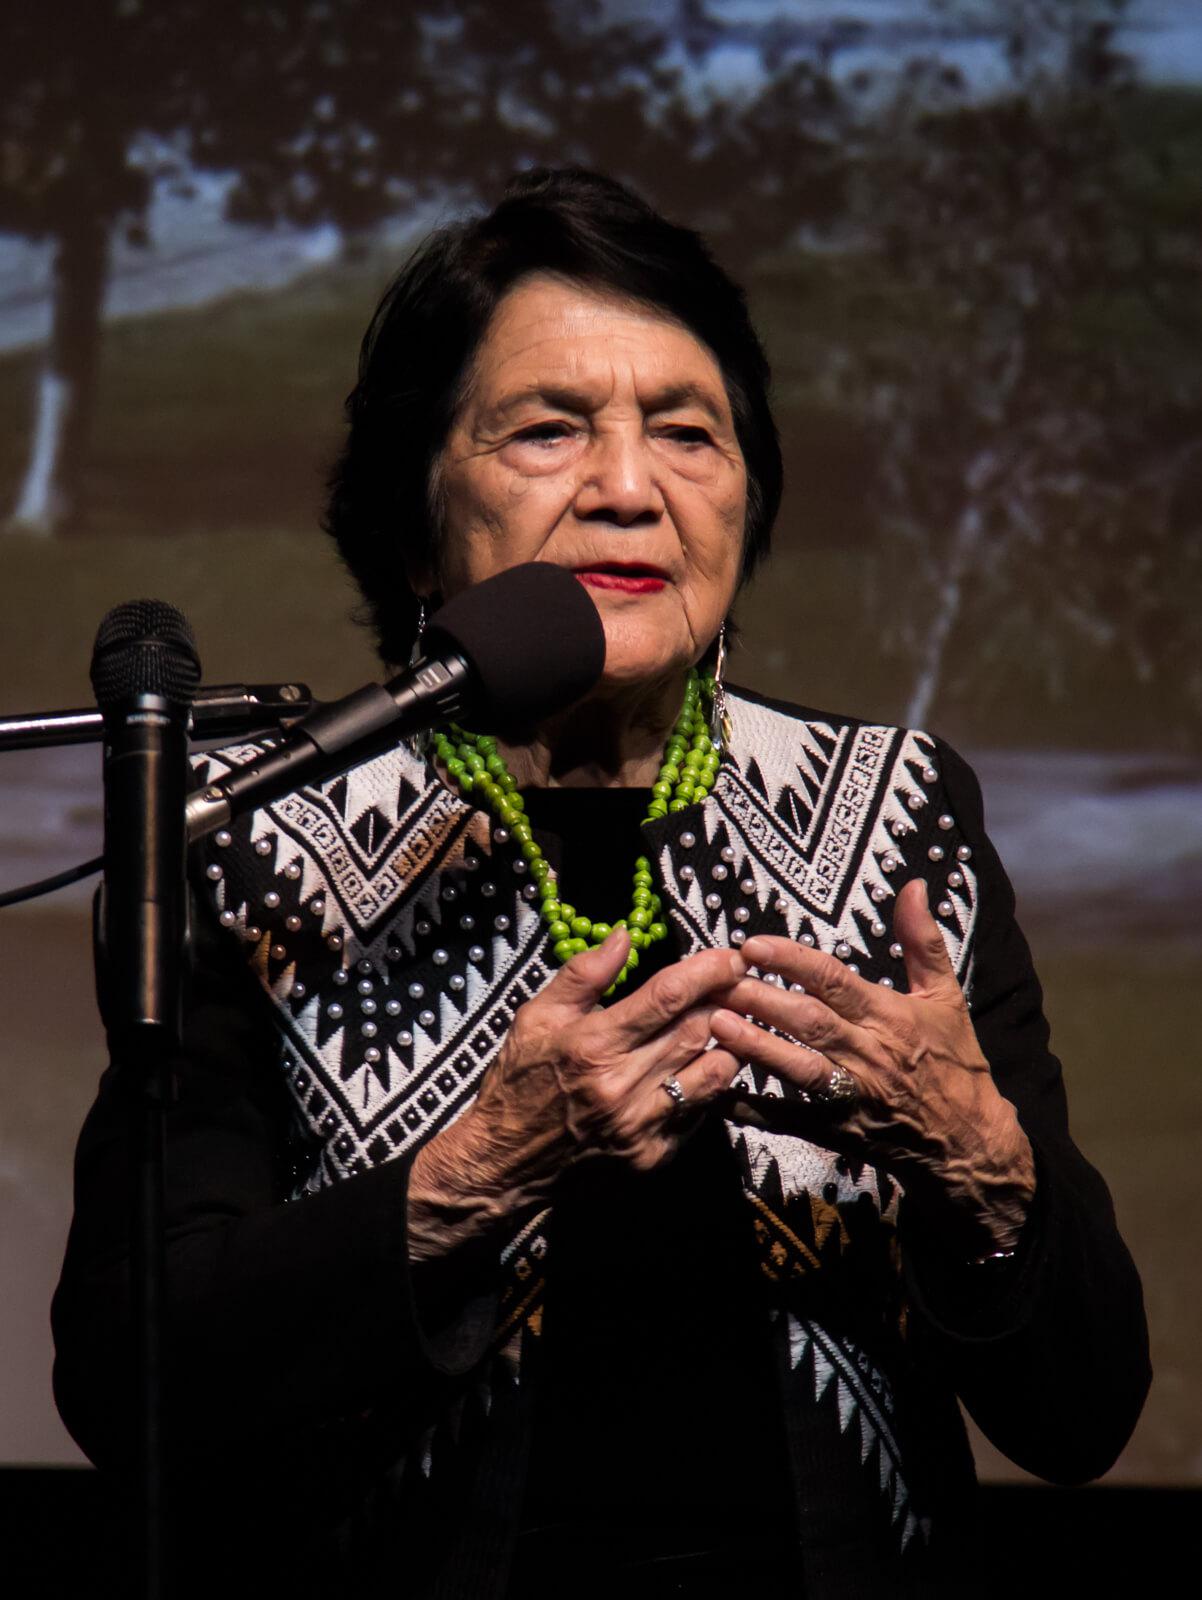 Dolores Huerta at the Si Se Puede: A Dialogue with Dolores Huerta event held in the SBVC Auditorium